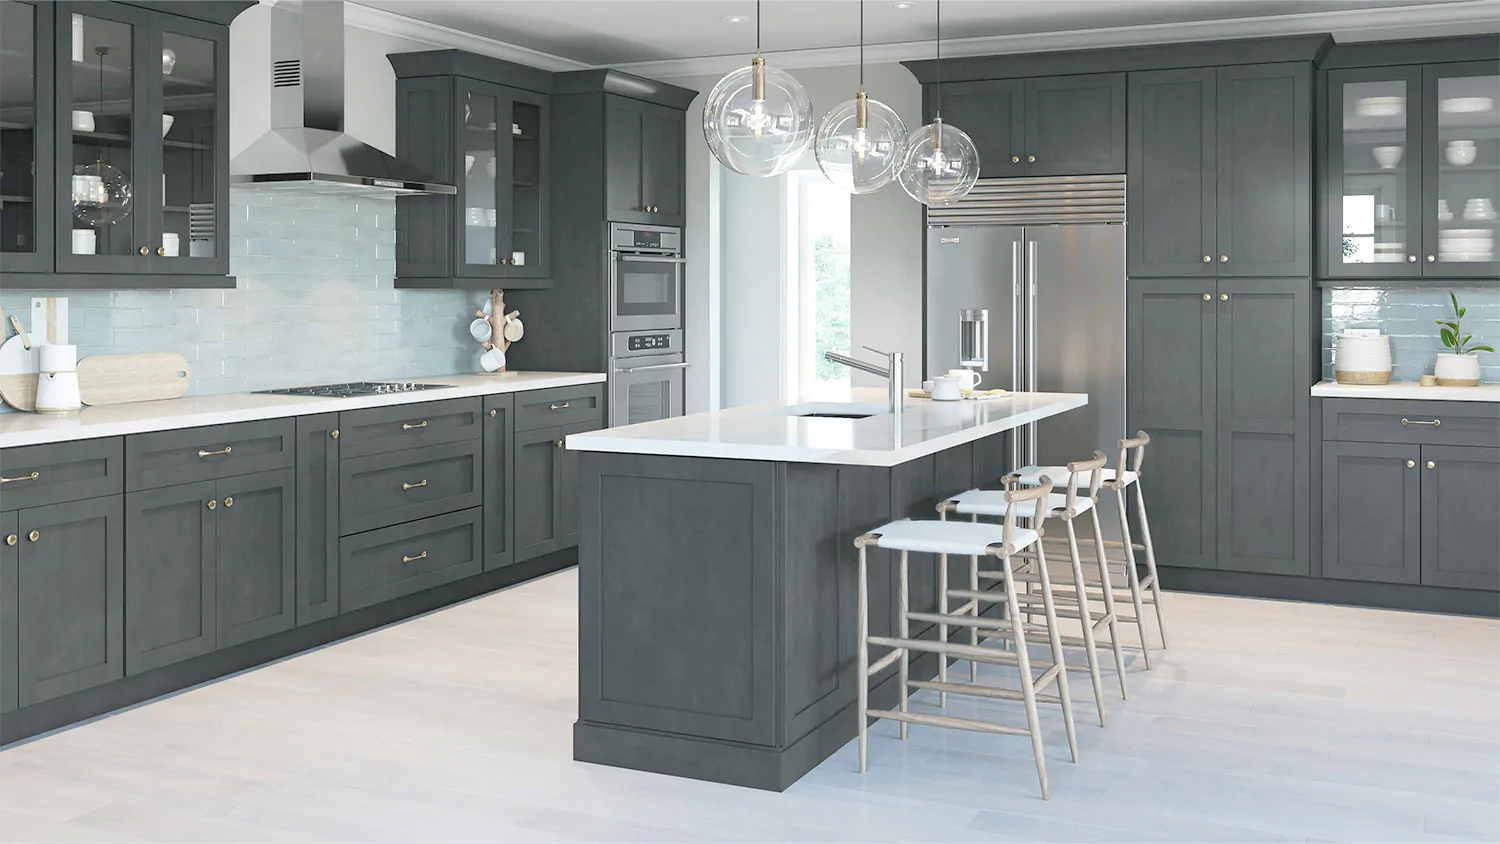 Secrets to Find Cheap and Best Kitchen Cabinet Sets Online at Nuform  Cabinetry by Nuform Cabinetry - Wholesale Cabinet Store in Pompano Beach,  FL - Alignable